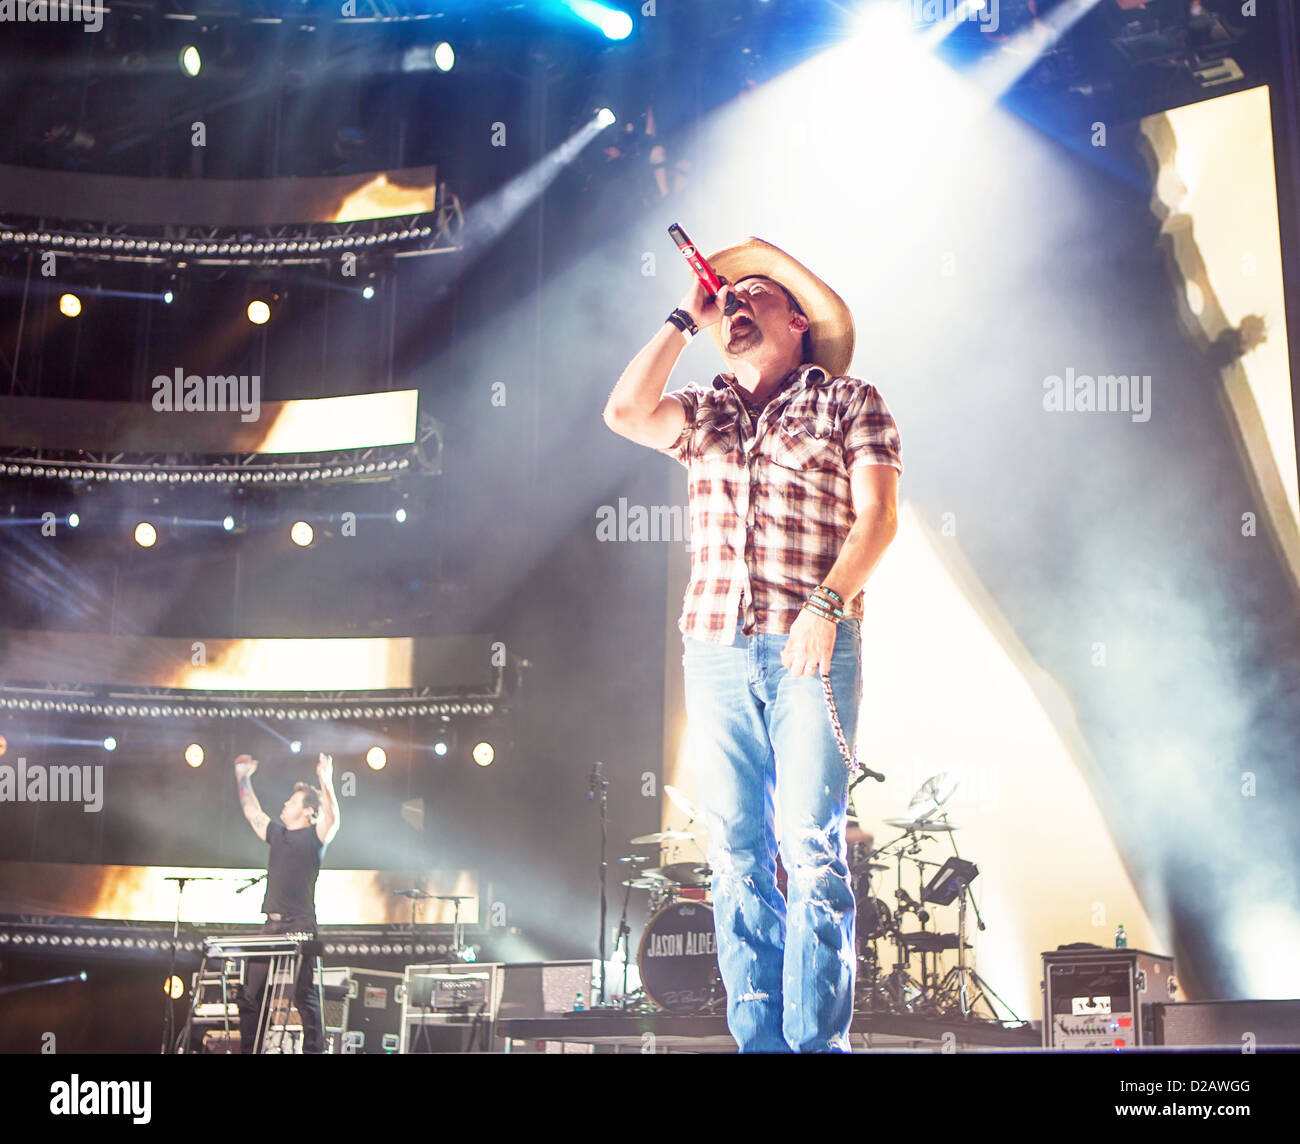 Country star Jason Aldean performs at the 2012 CMA Music Festival in Nashville, TN Stock Photo